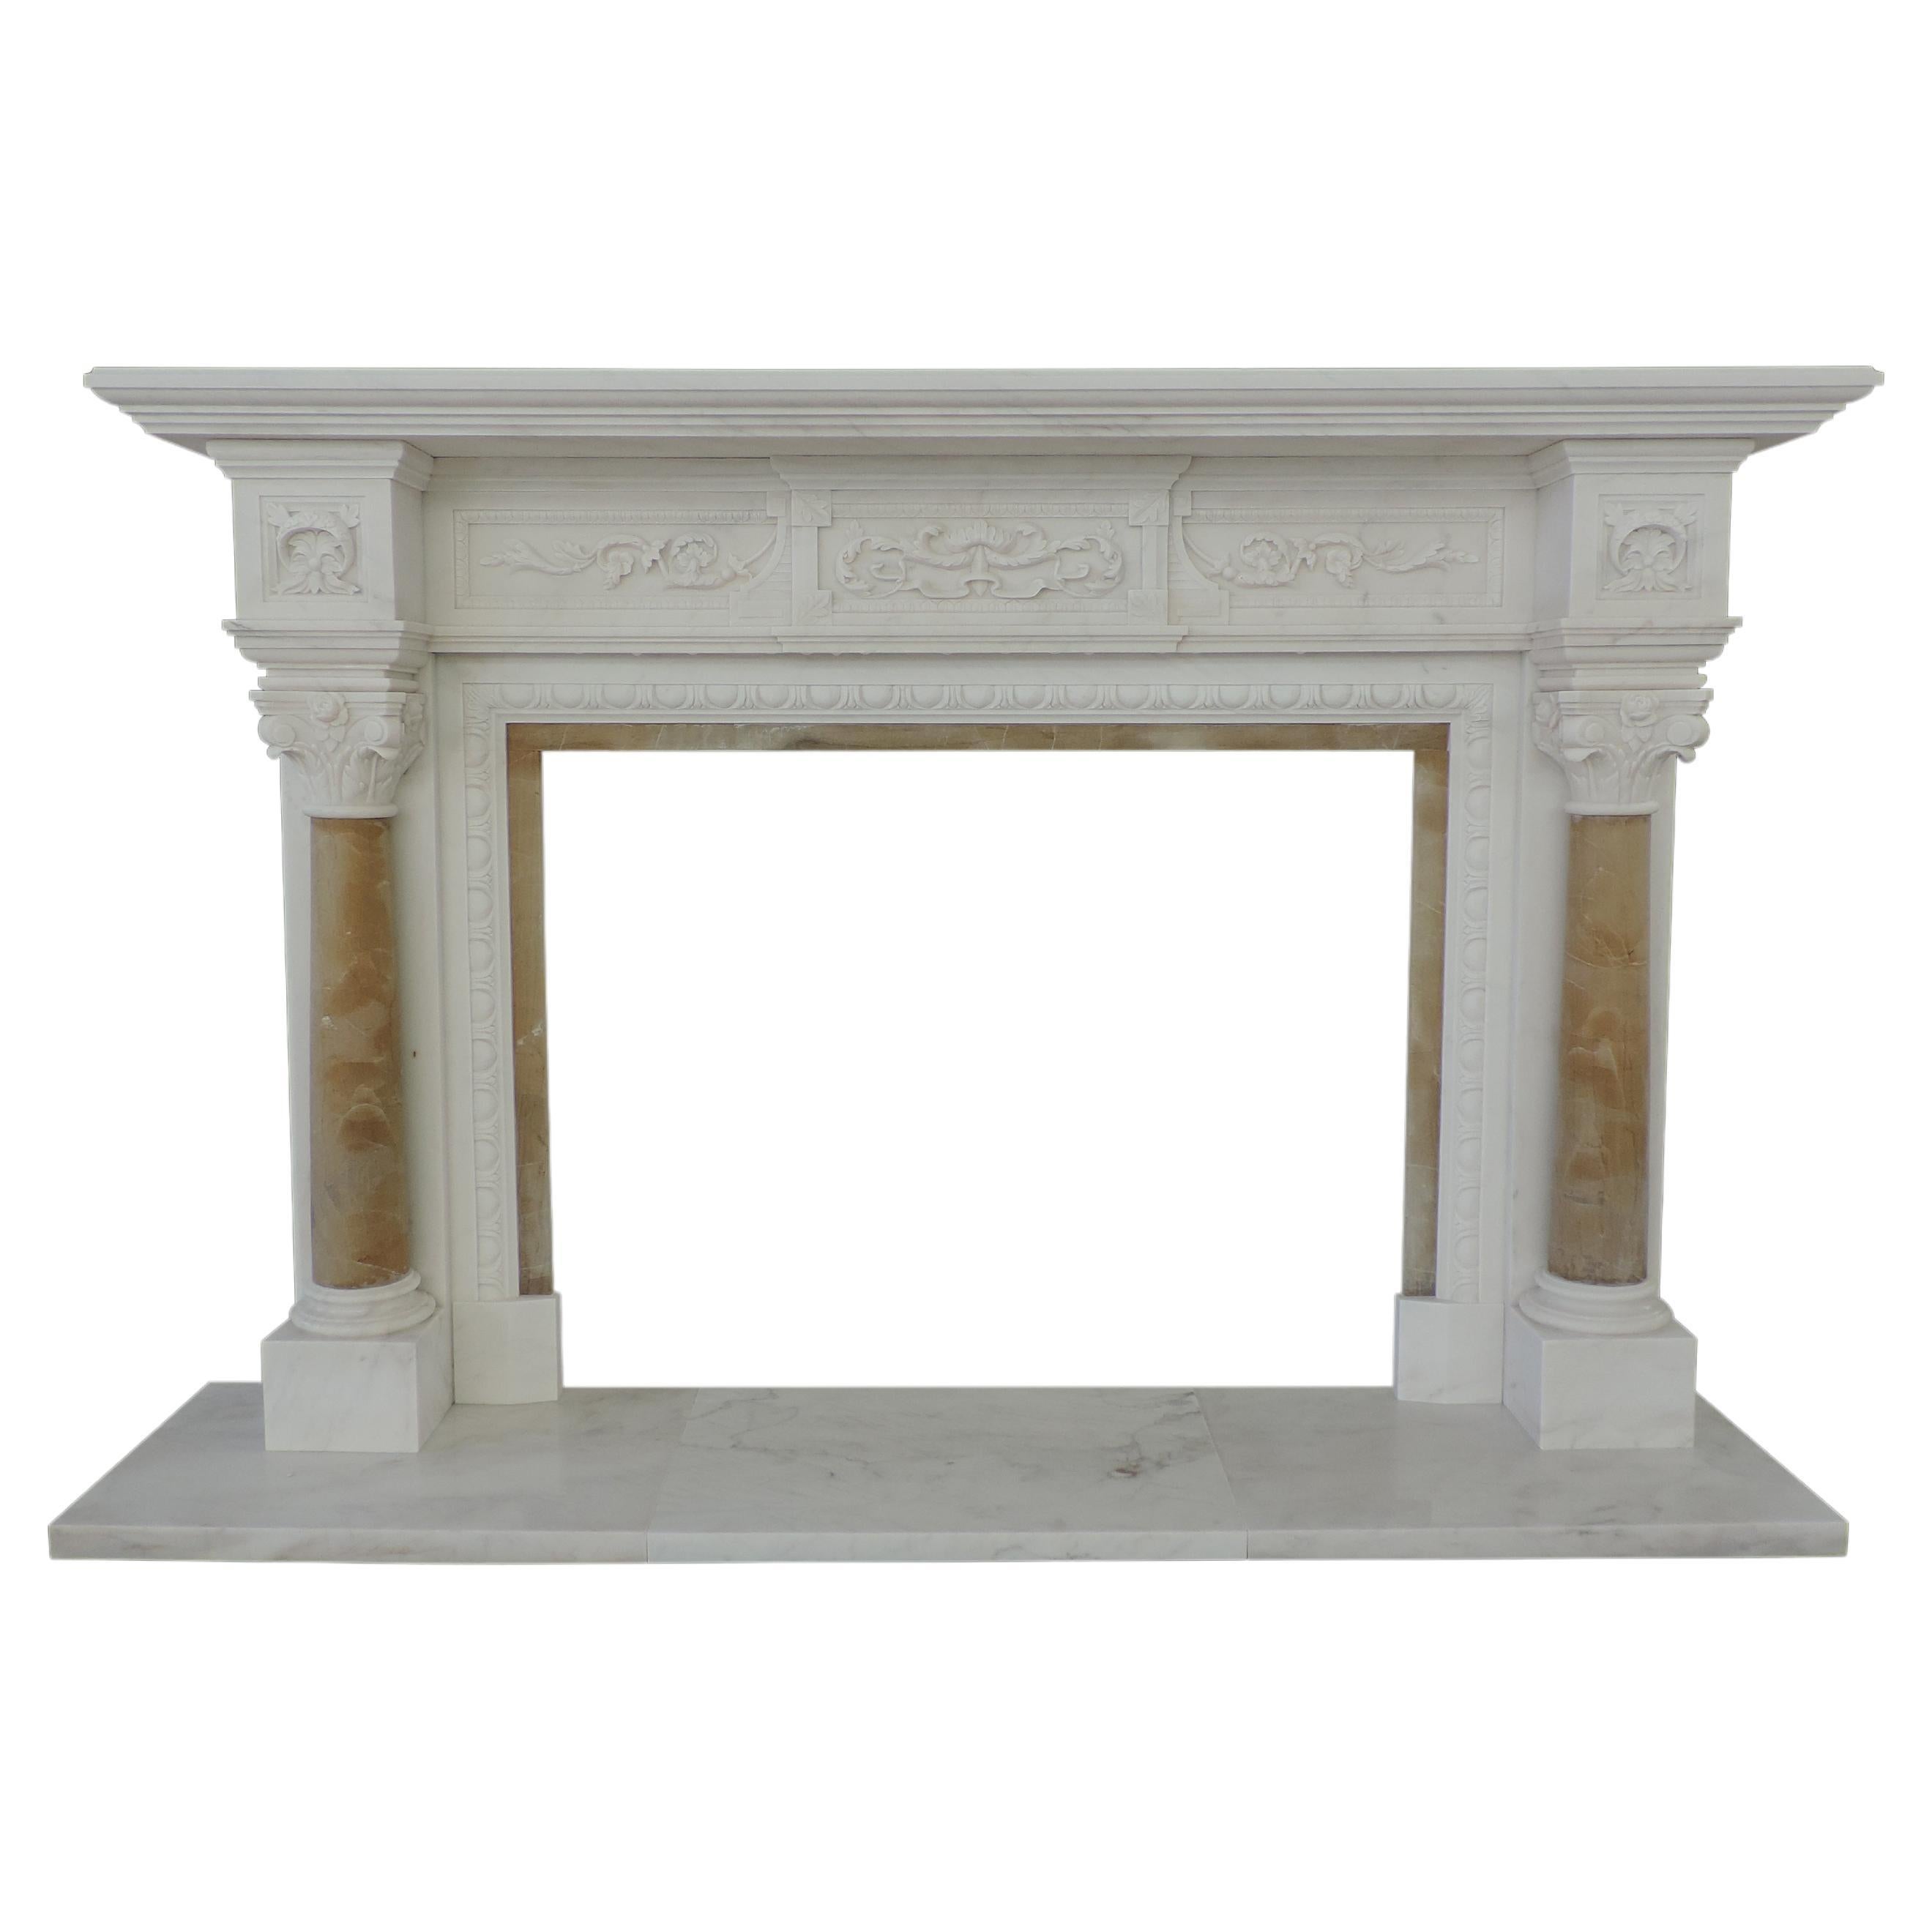 Italian Style 19th Centry Hand Carved Two Color Marble Fire Surround